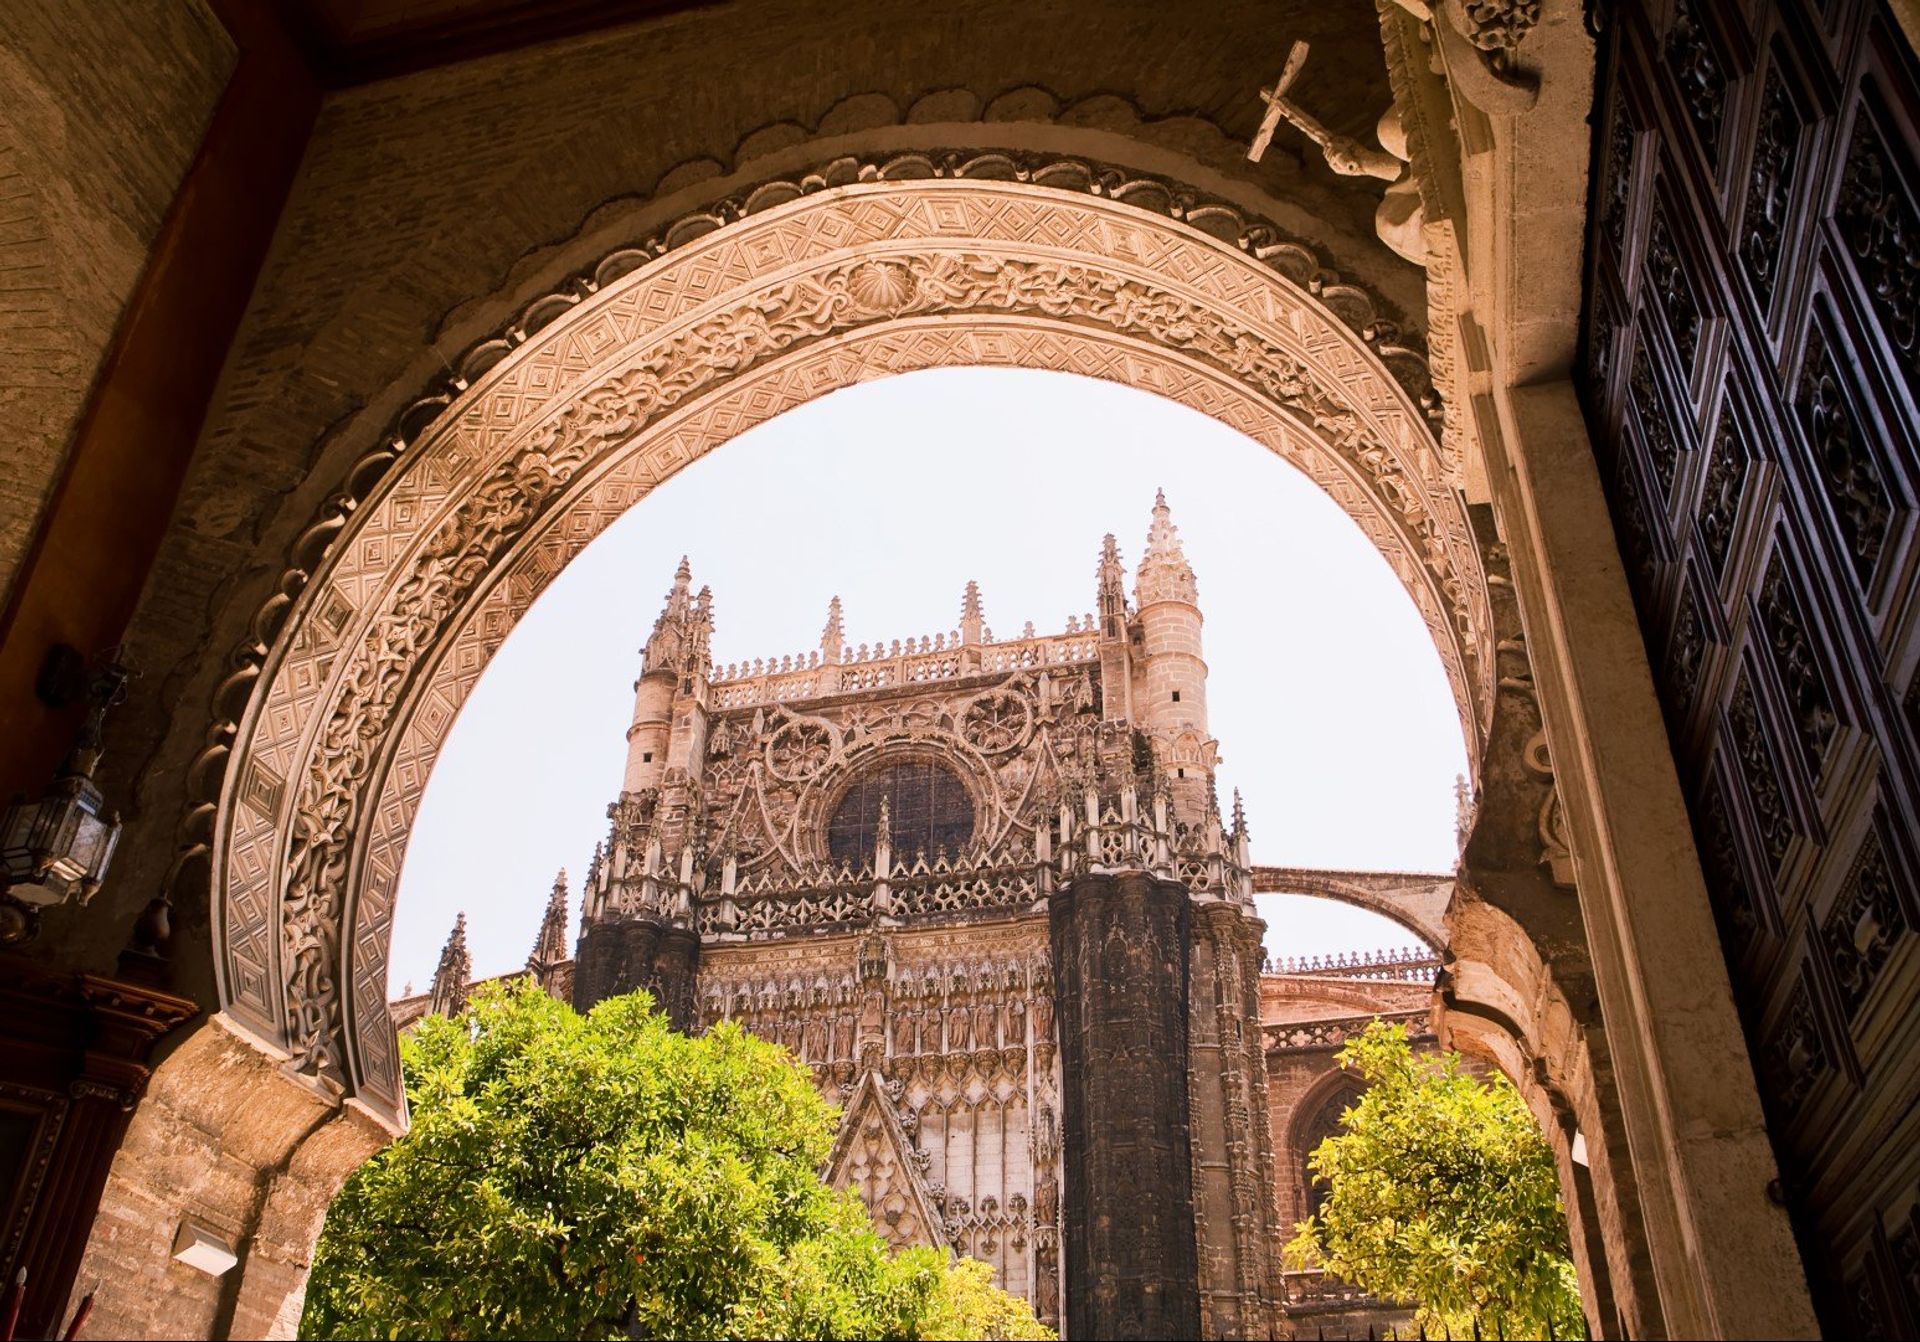 Moorish and Christian architecture standing side by side - Seville Cathedral seen from the Giralda tower